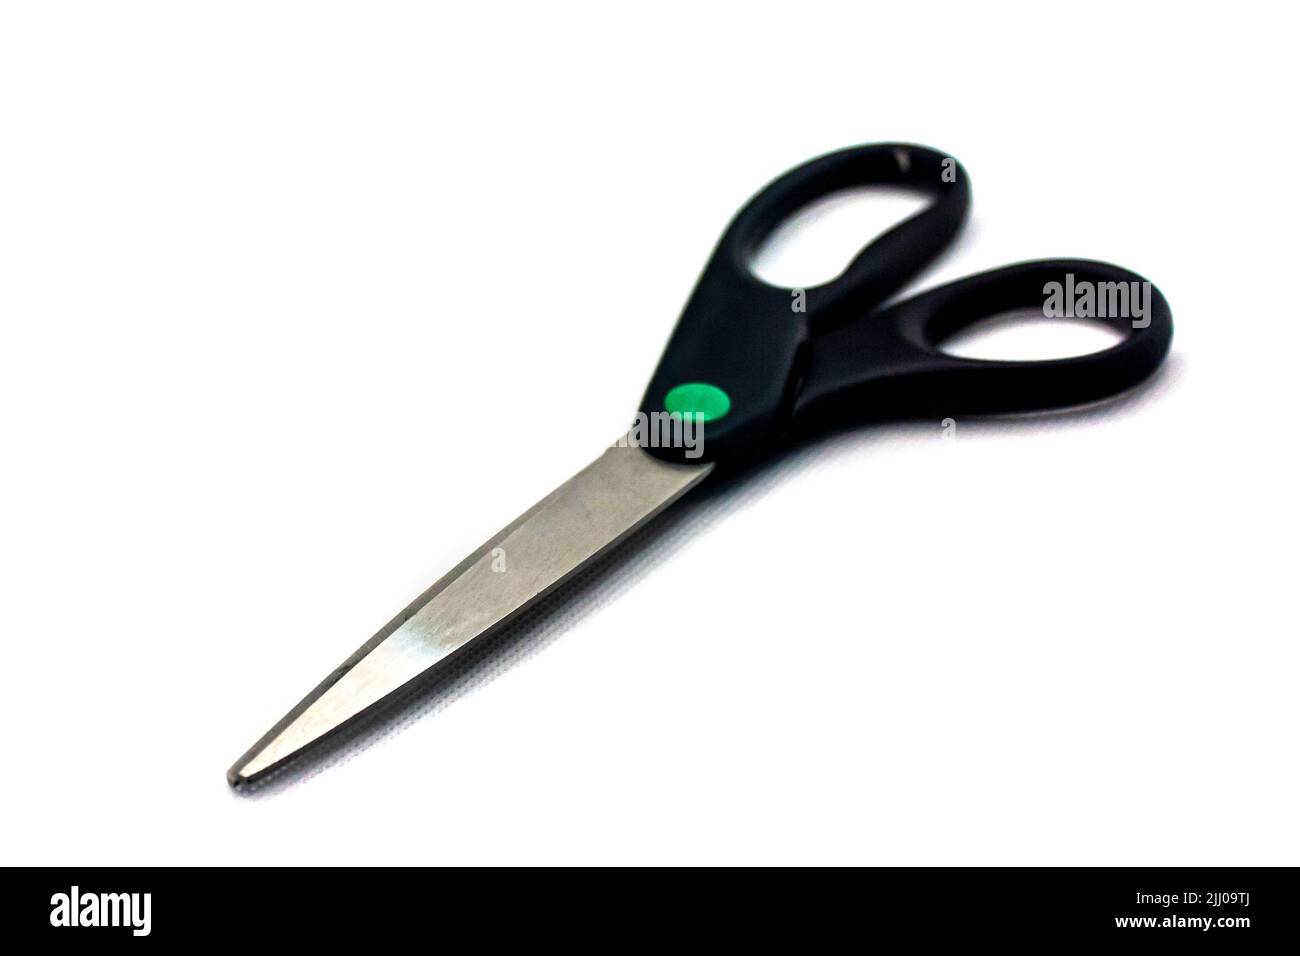 A pair of scissors isolated on a white background Stock Photo